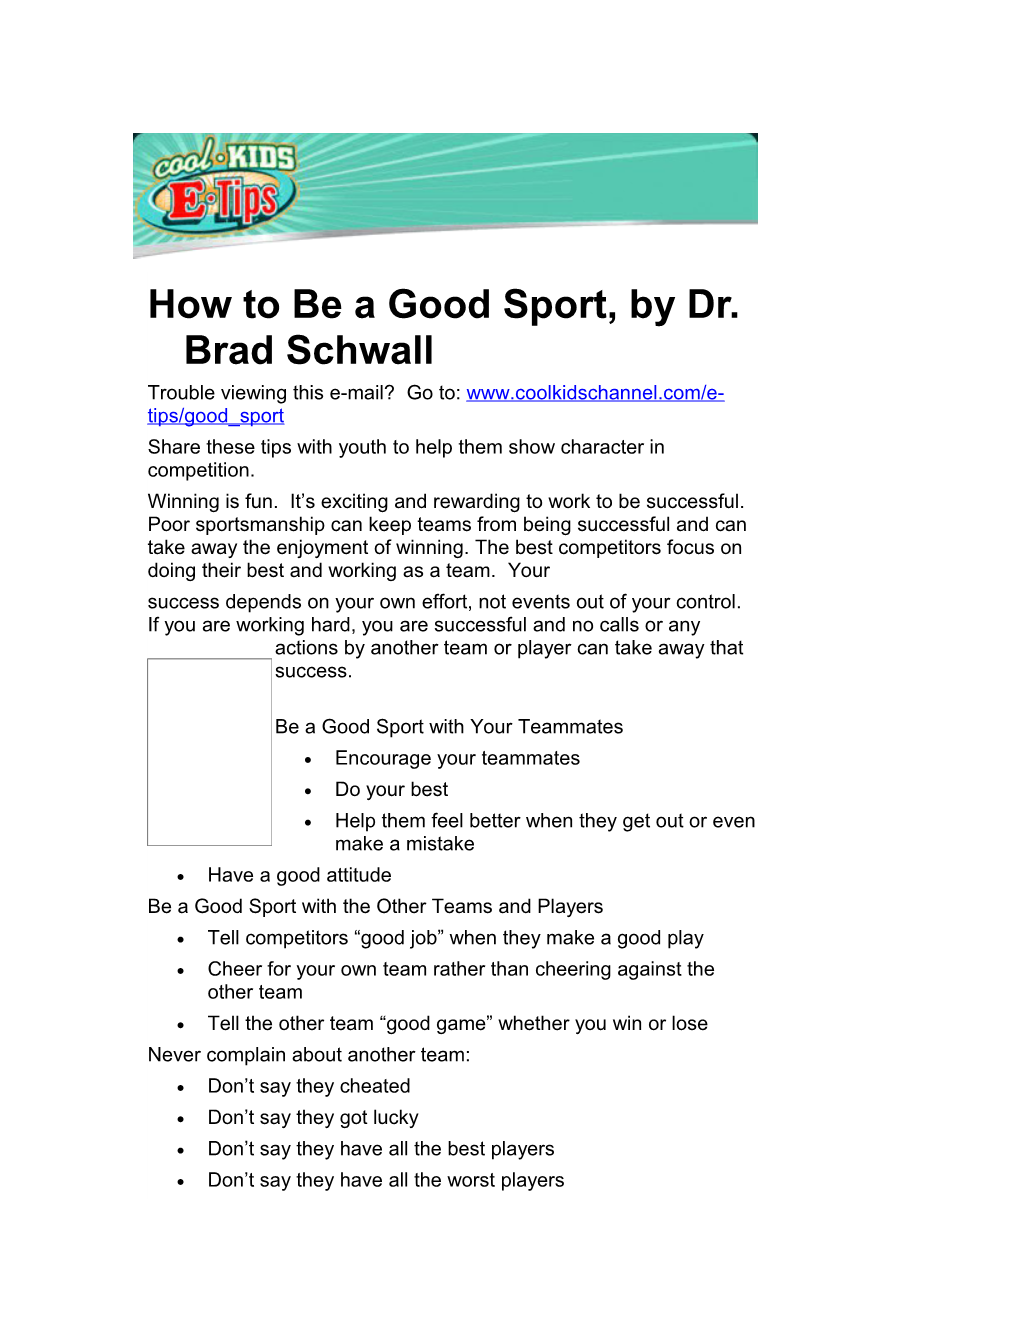 How to Be a Good Sport, by Dr. Brad Schwall Trouble Viewing This E-Mail? Go To: Share